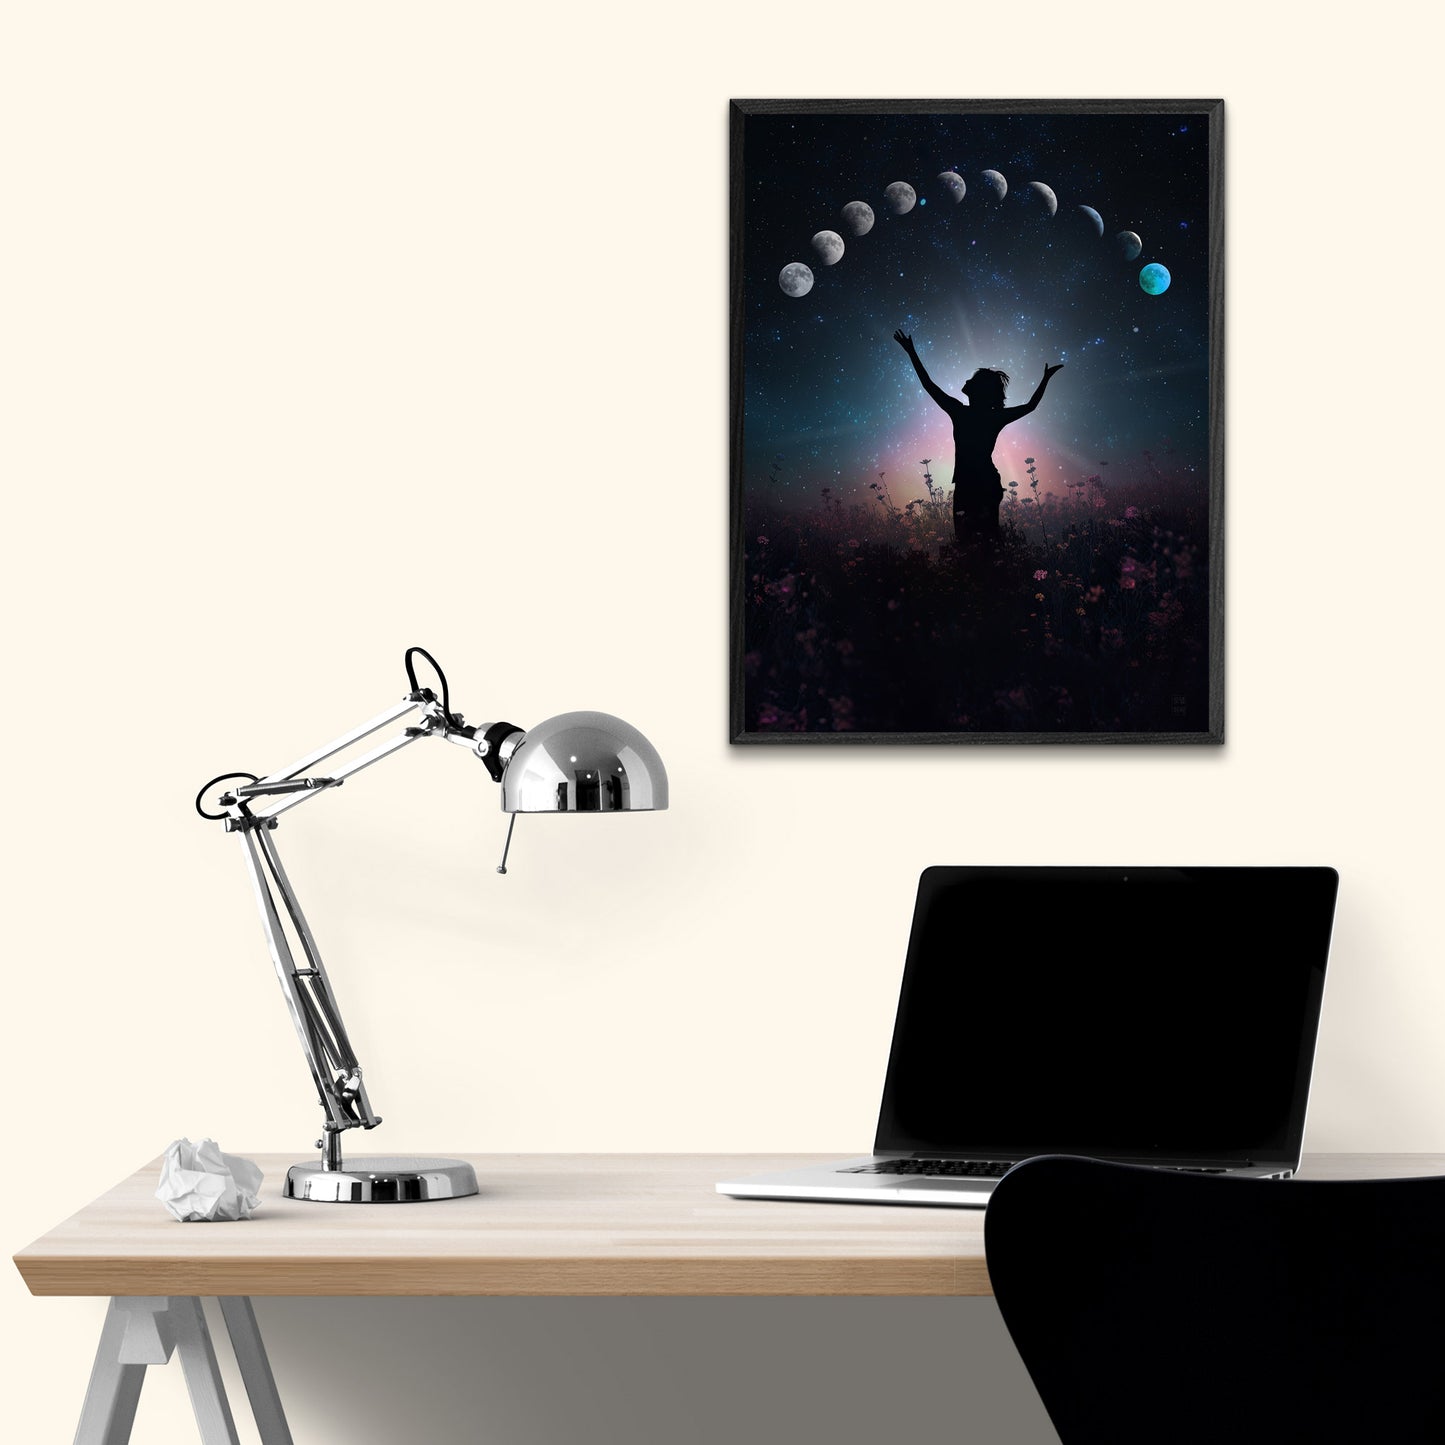 Balancing the Phases 18X24 Inch Poster Print for Space Art Fans, for home decor and room design